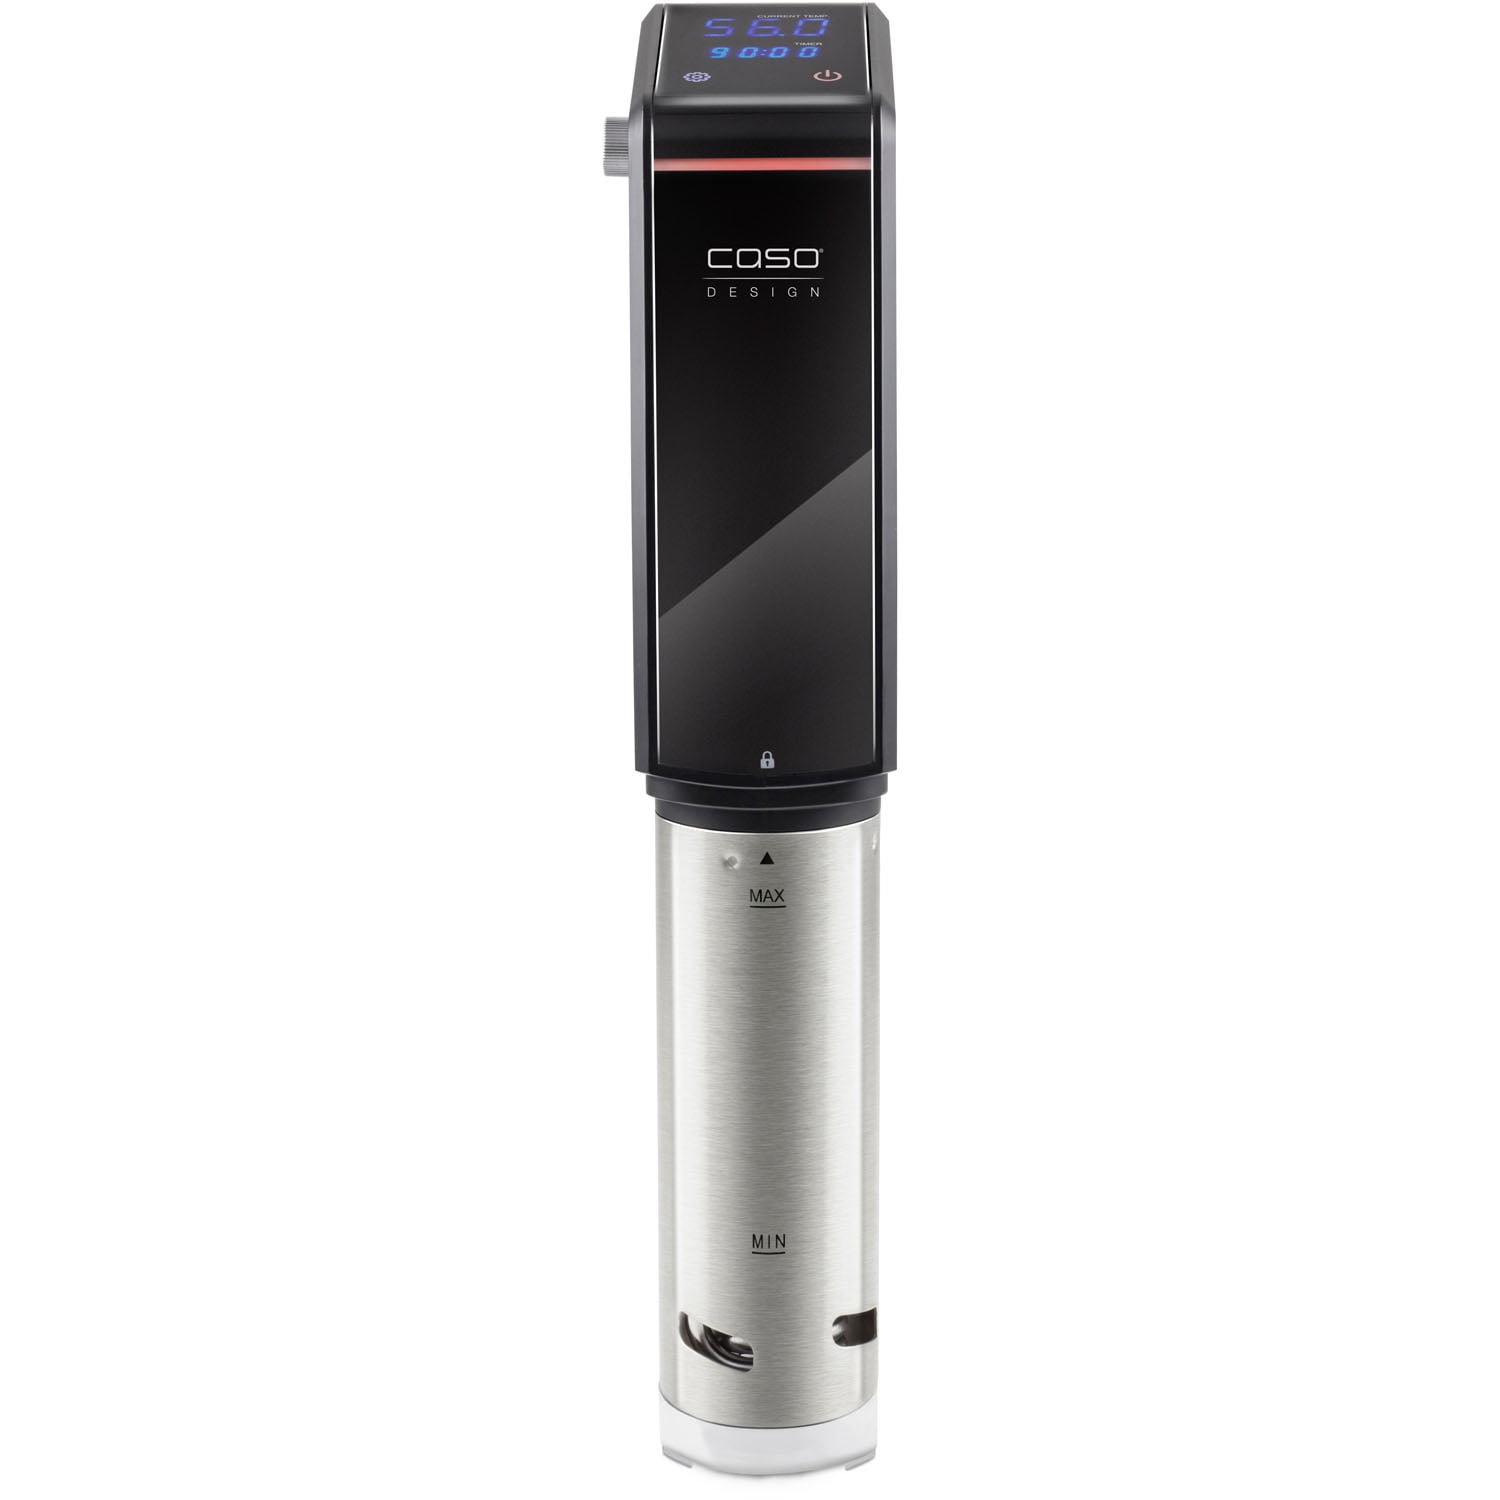 Caso Design SV 400 Sous Vide Stick Cooker with Timer Function, 11310